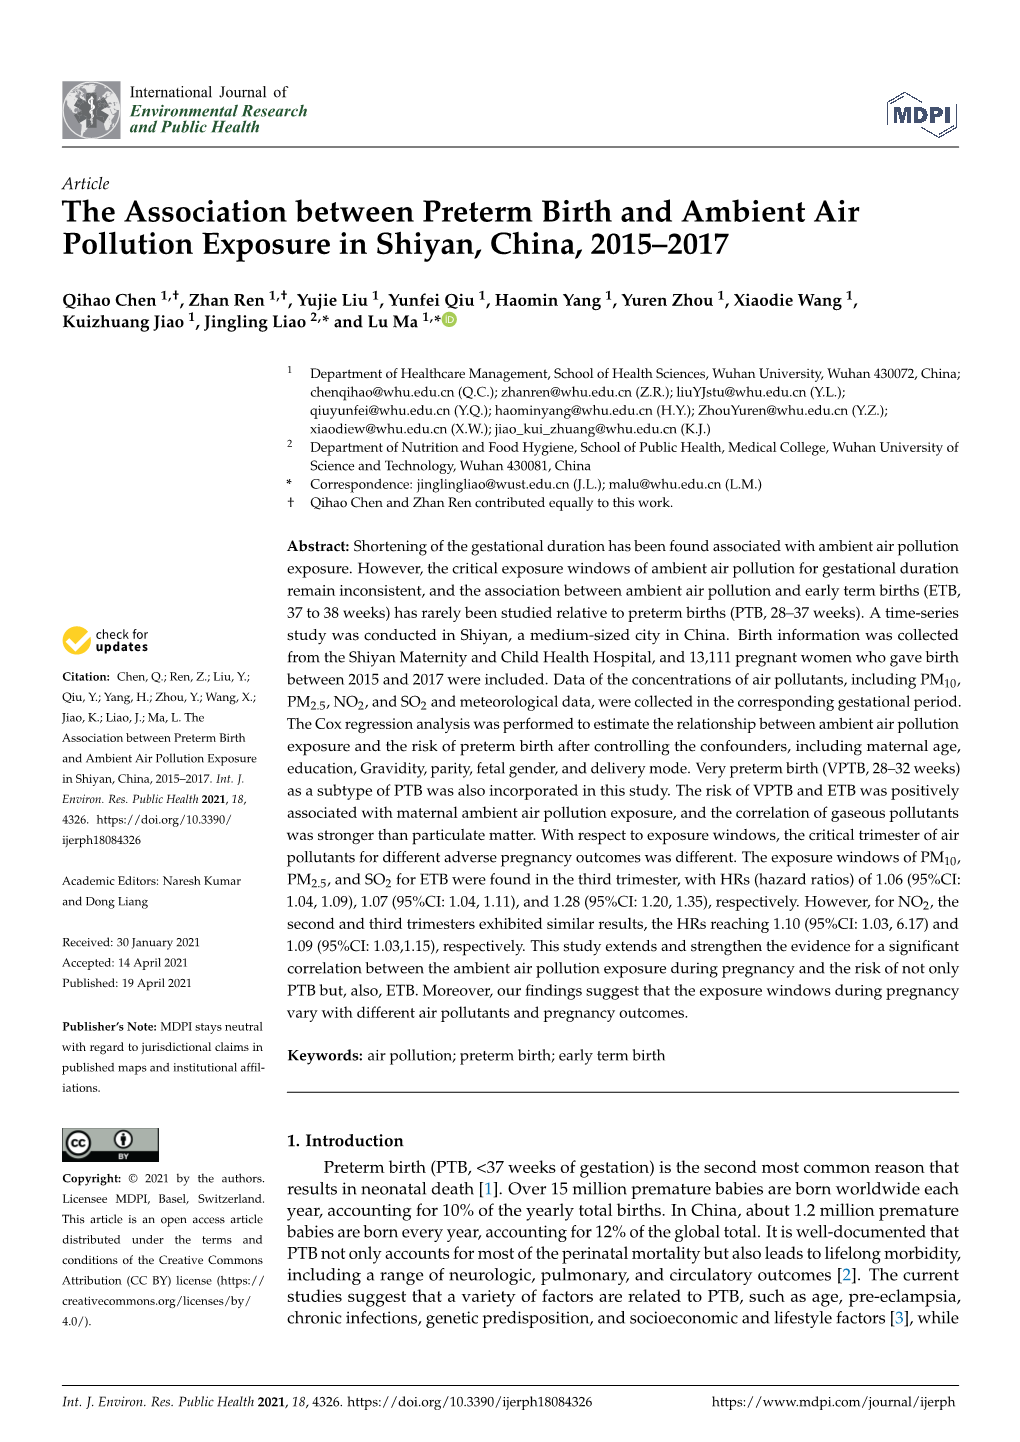 The Association Between Preterm Birth and Ambient Air Pollution Exposure in Shiyan, China, 2015–2017